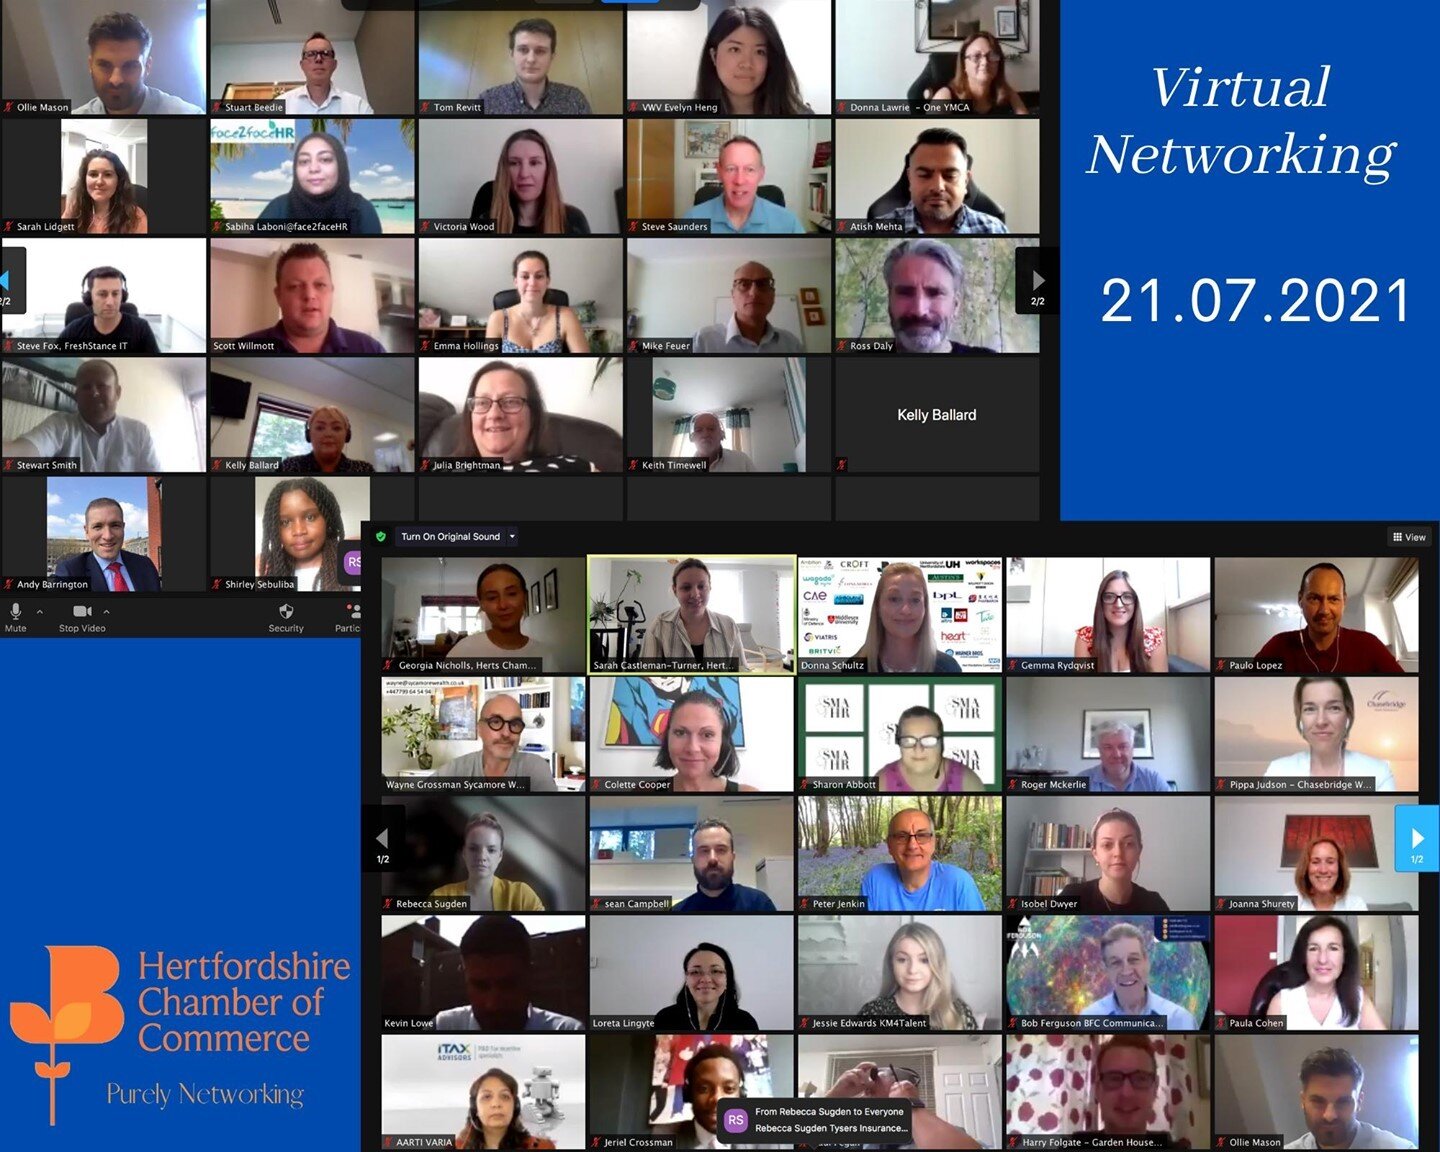 It was so lovely to see everyone in our #Virtual #Networking yesterday!
We can't wait to meet you all again alongside our neighbours @BedsChamberInfo &amp; @cambschamber on 18th August! https://bit.ly/3rpPUe2